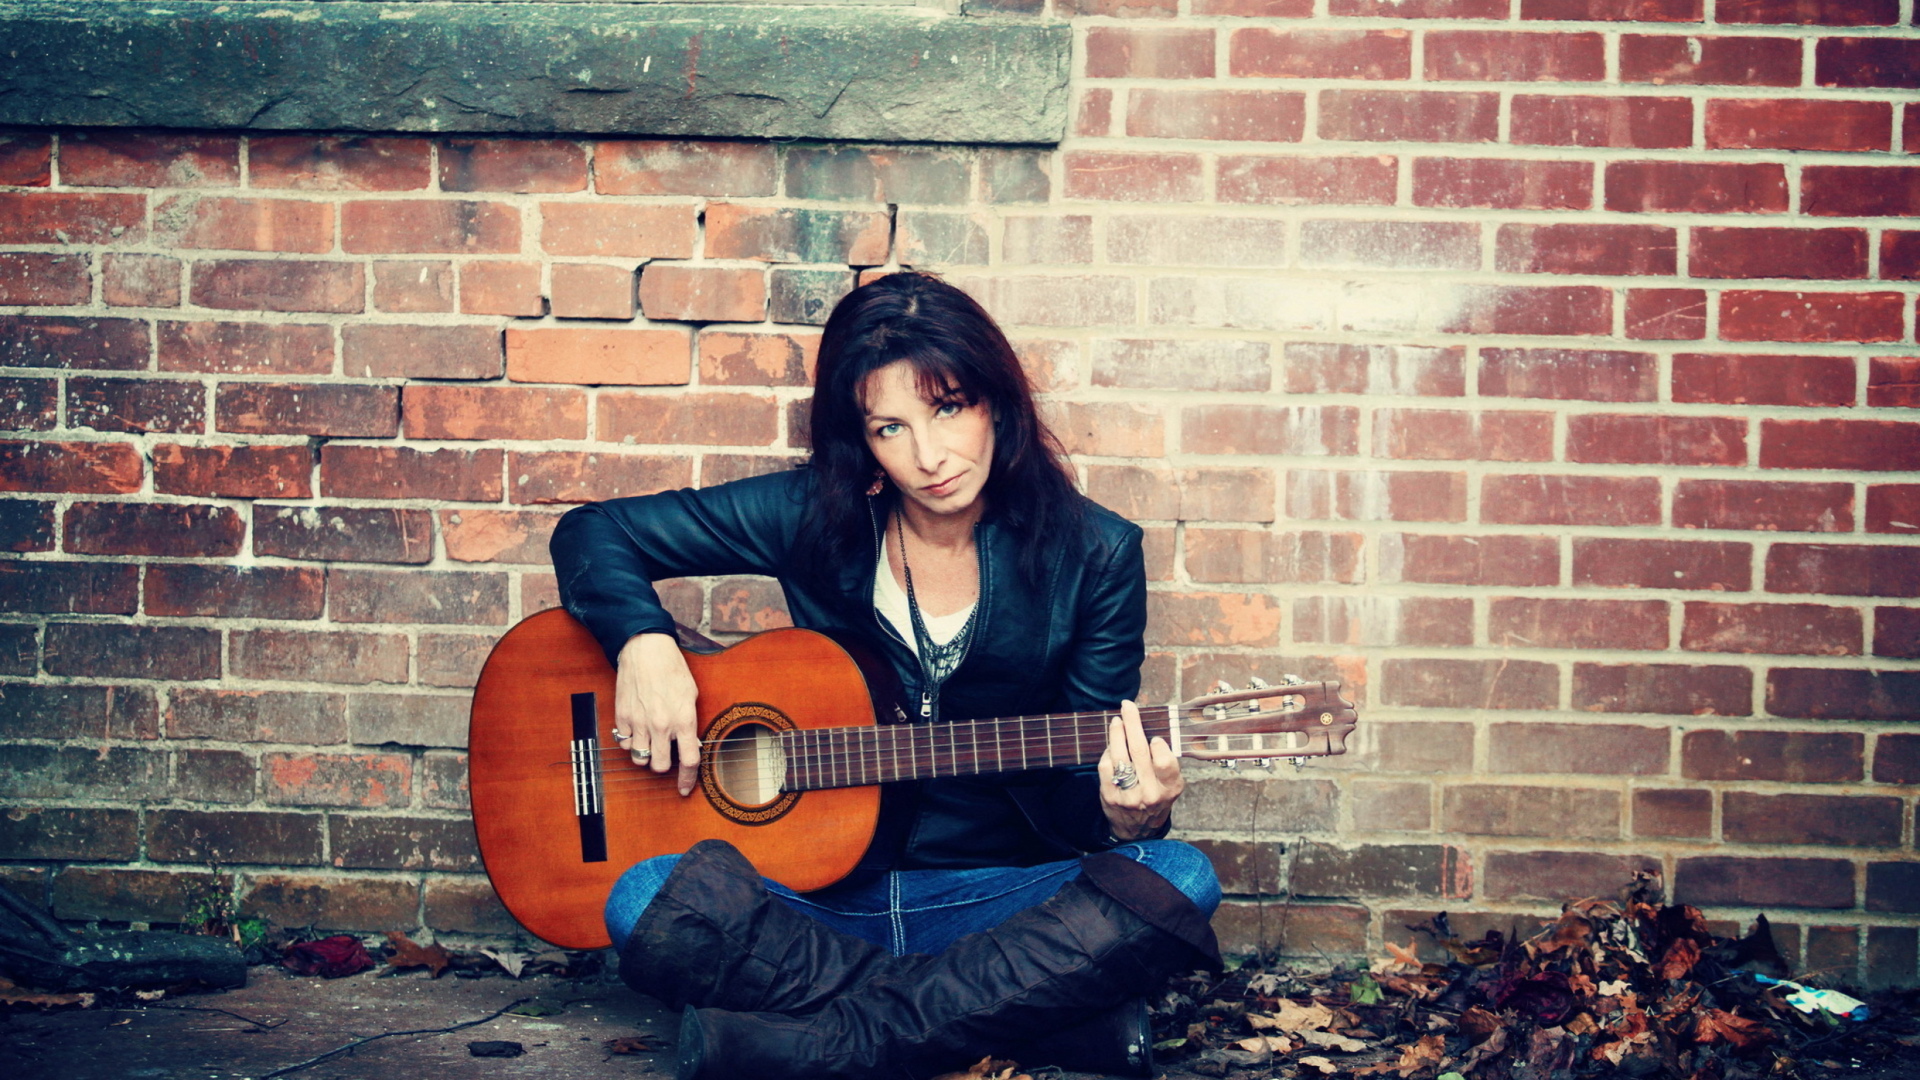 Woman With Guitar wallpaper 1920x1080